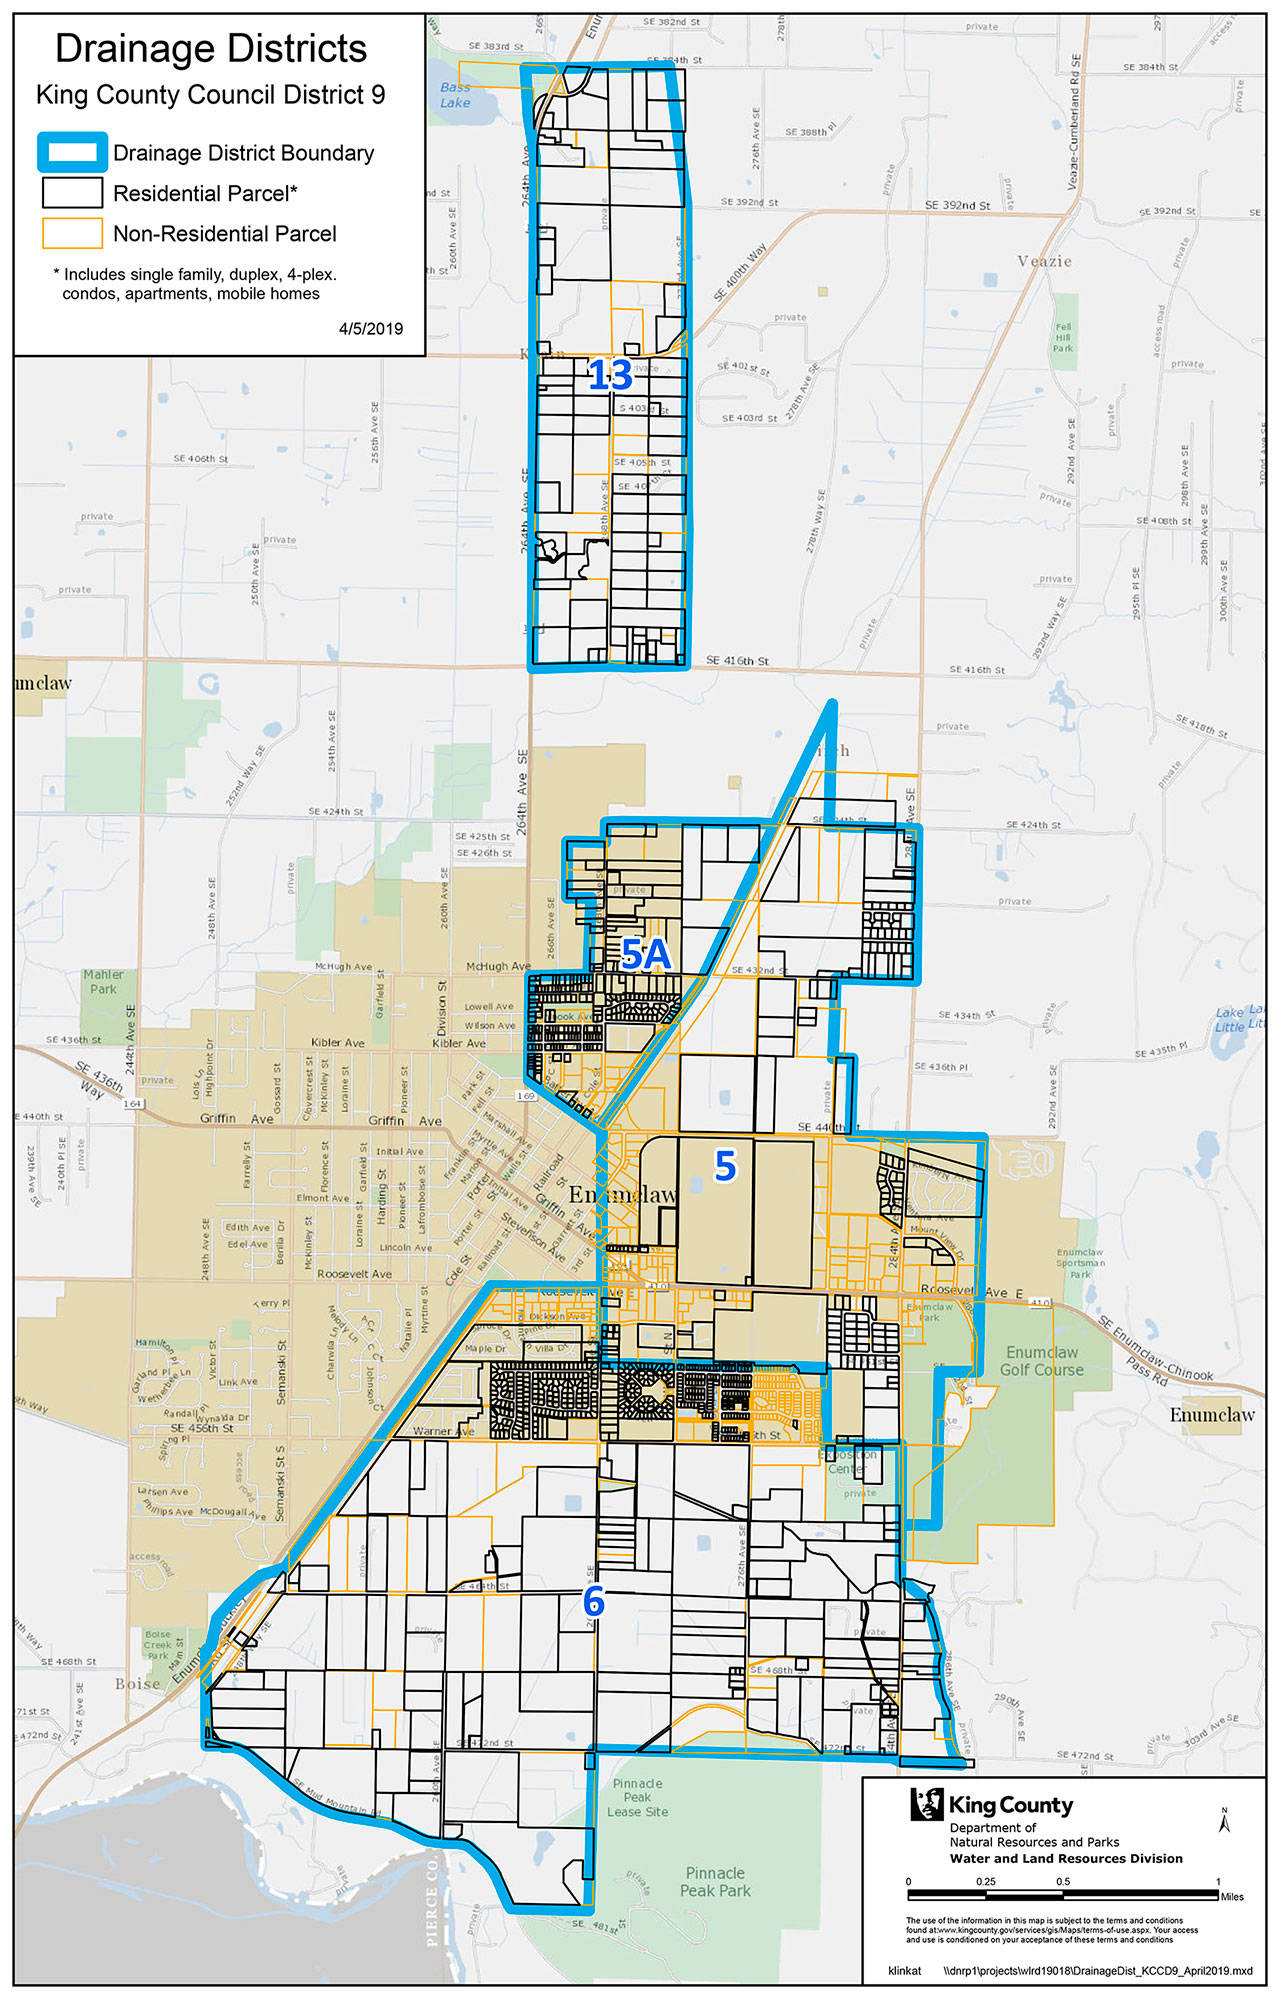 Meet with possible Drainage District 5 commissioners